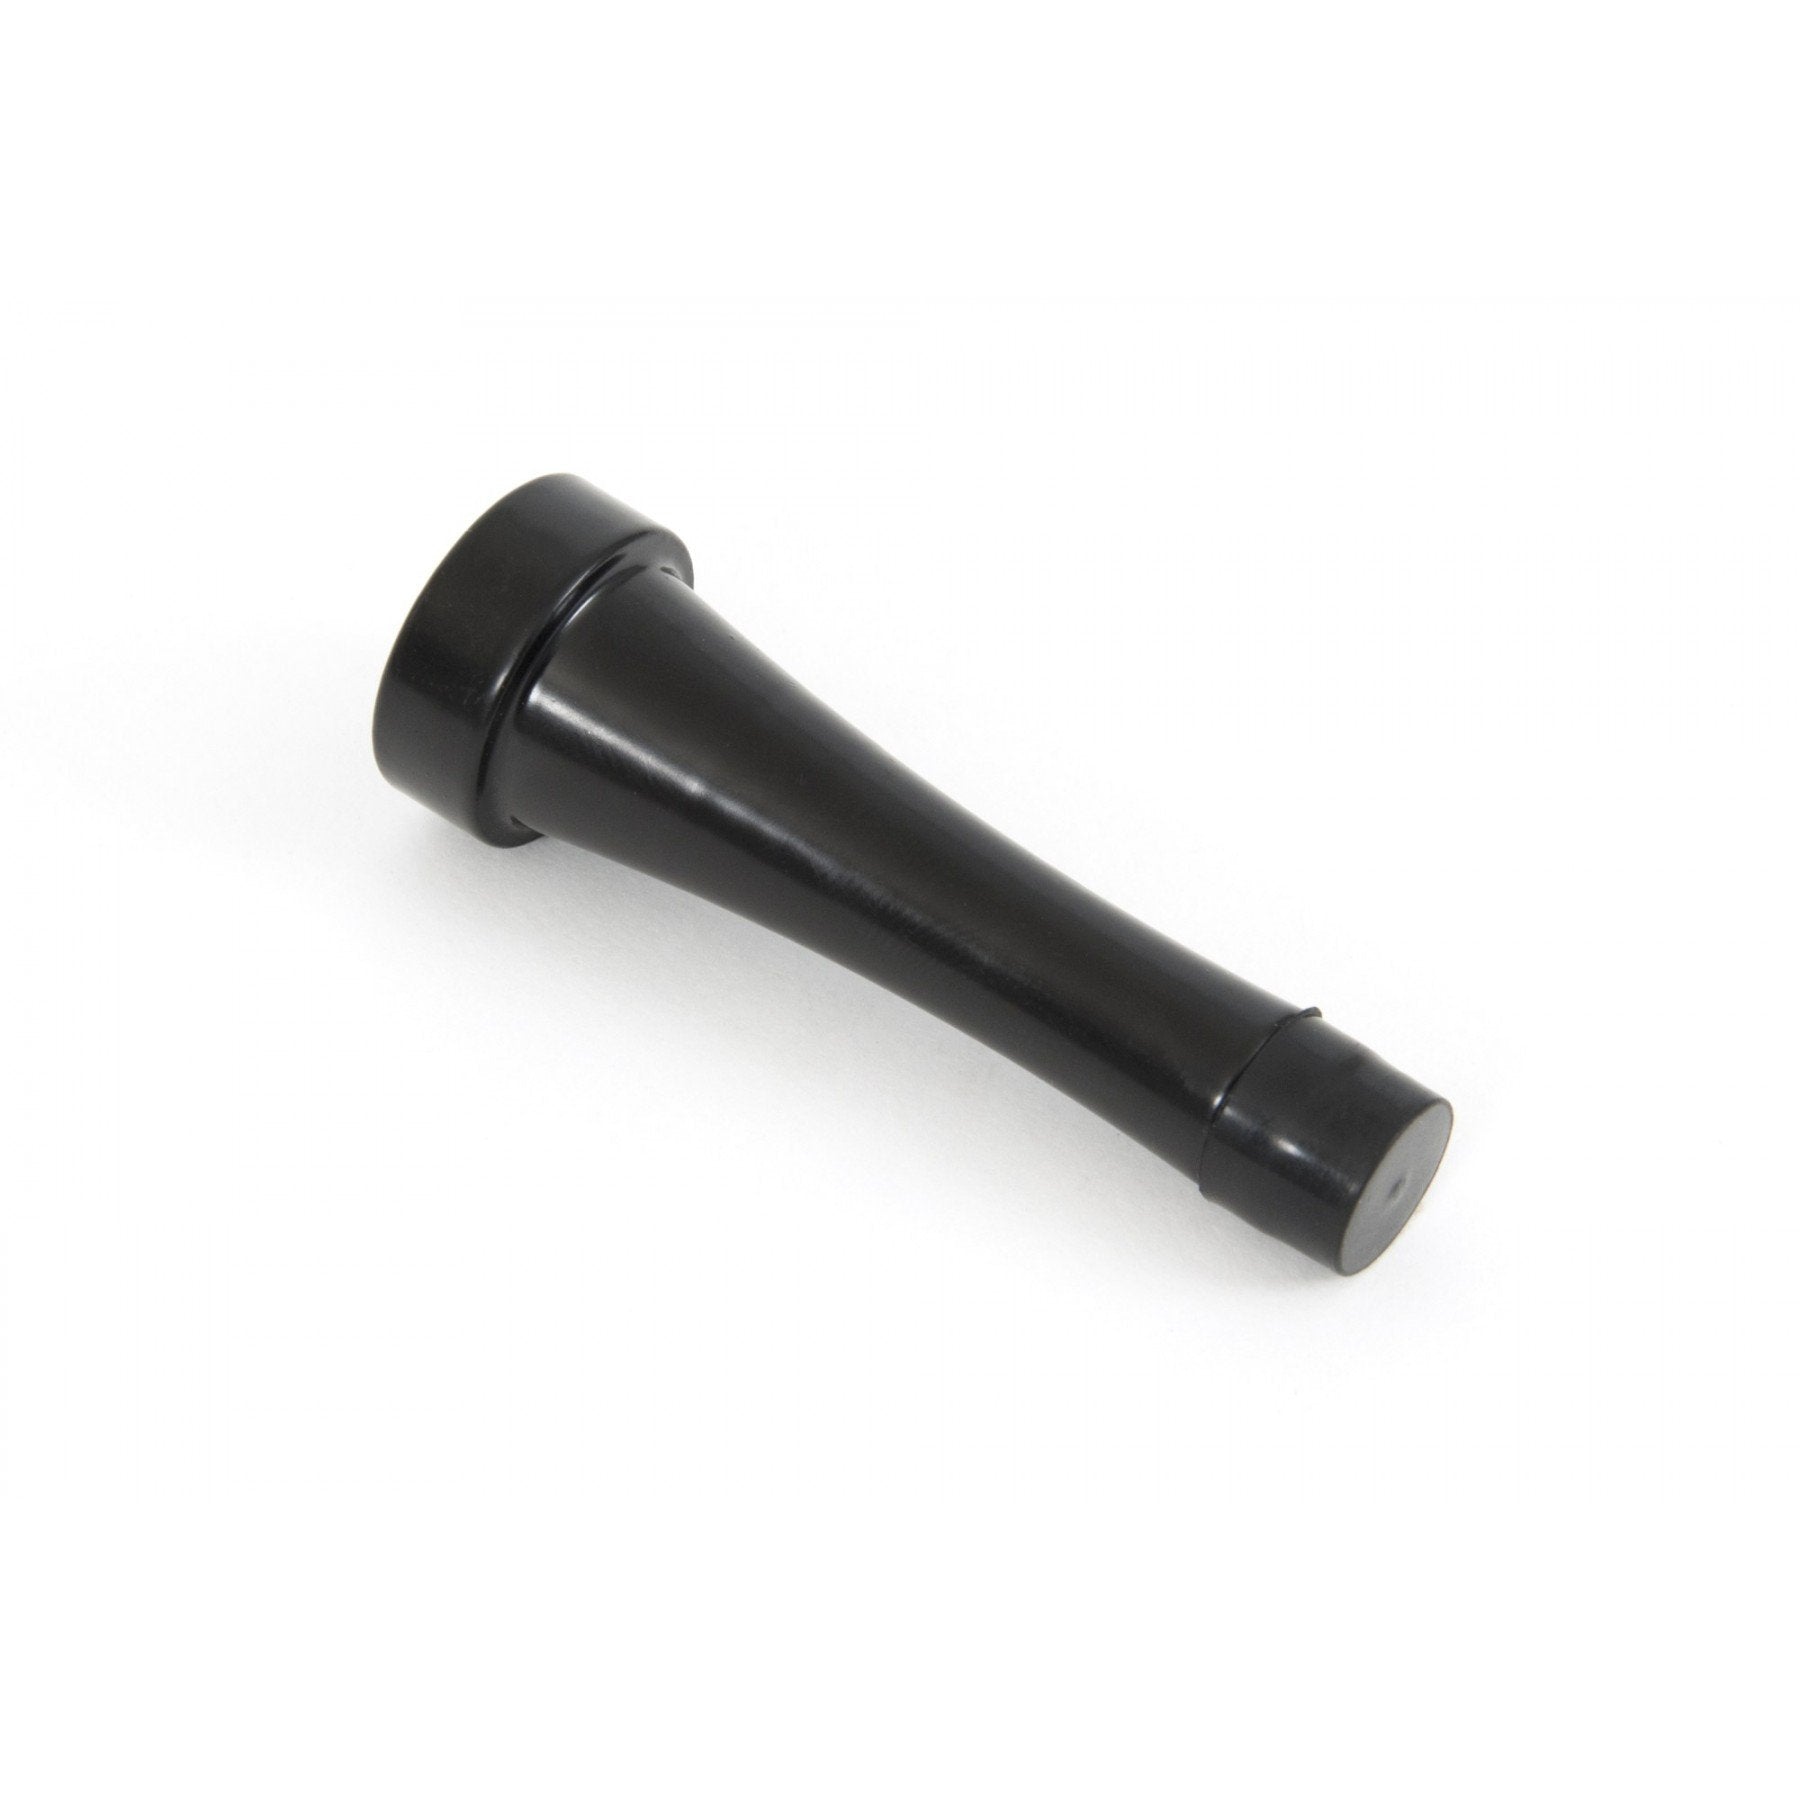 From the Anvil Black Projection Door Stop